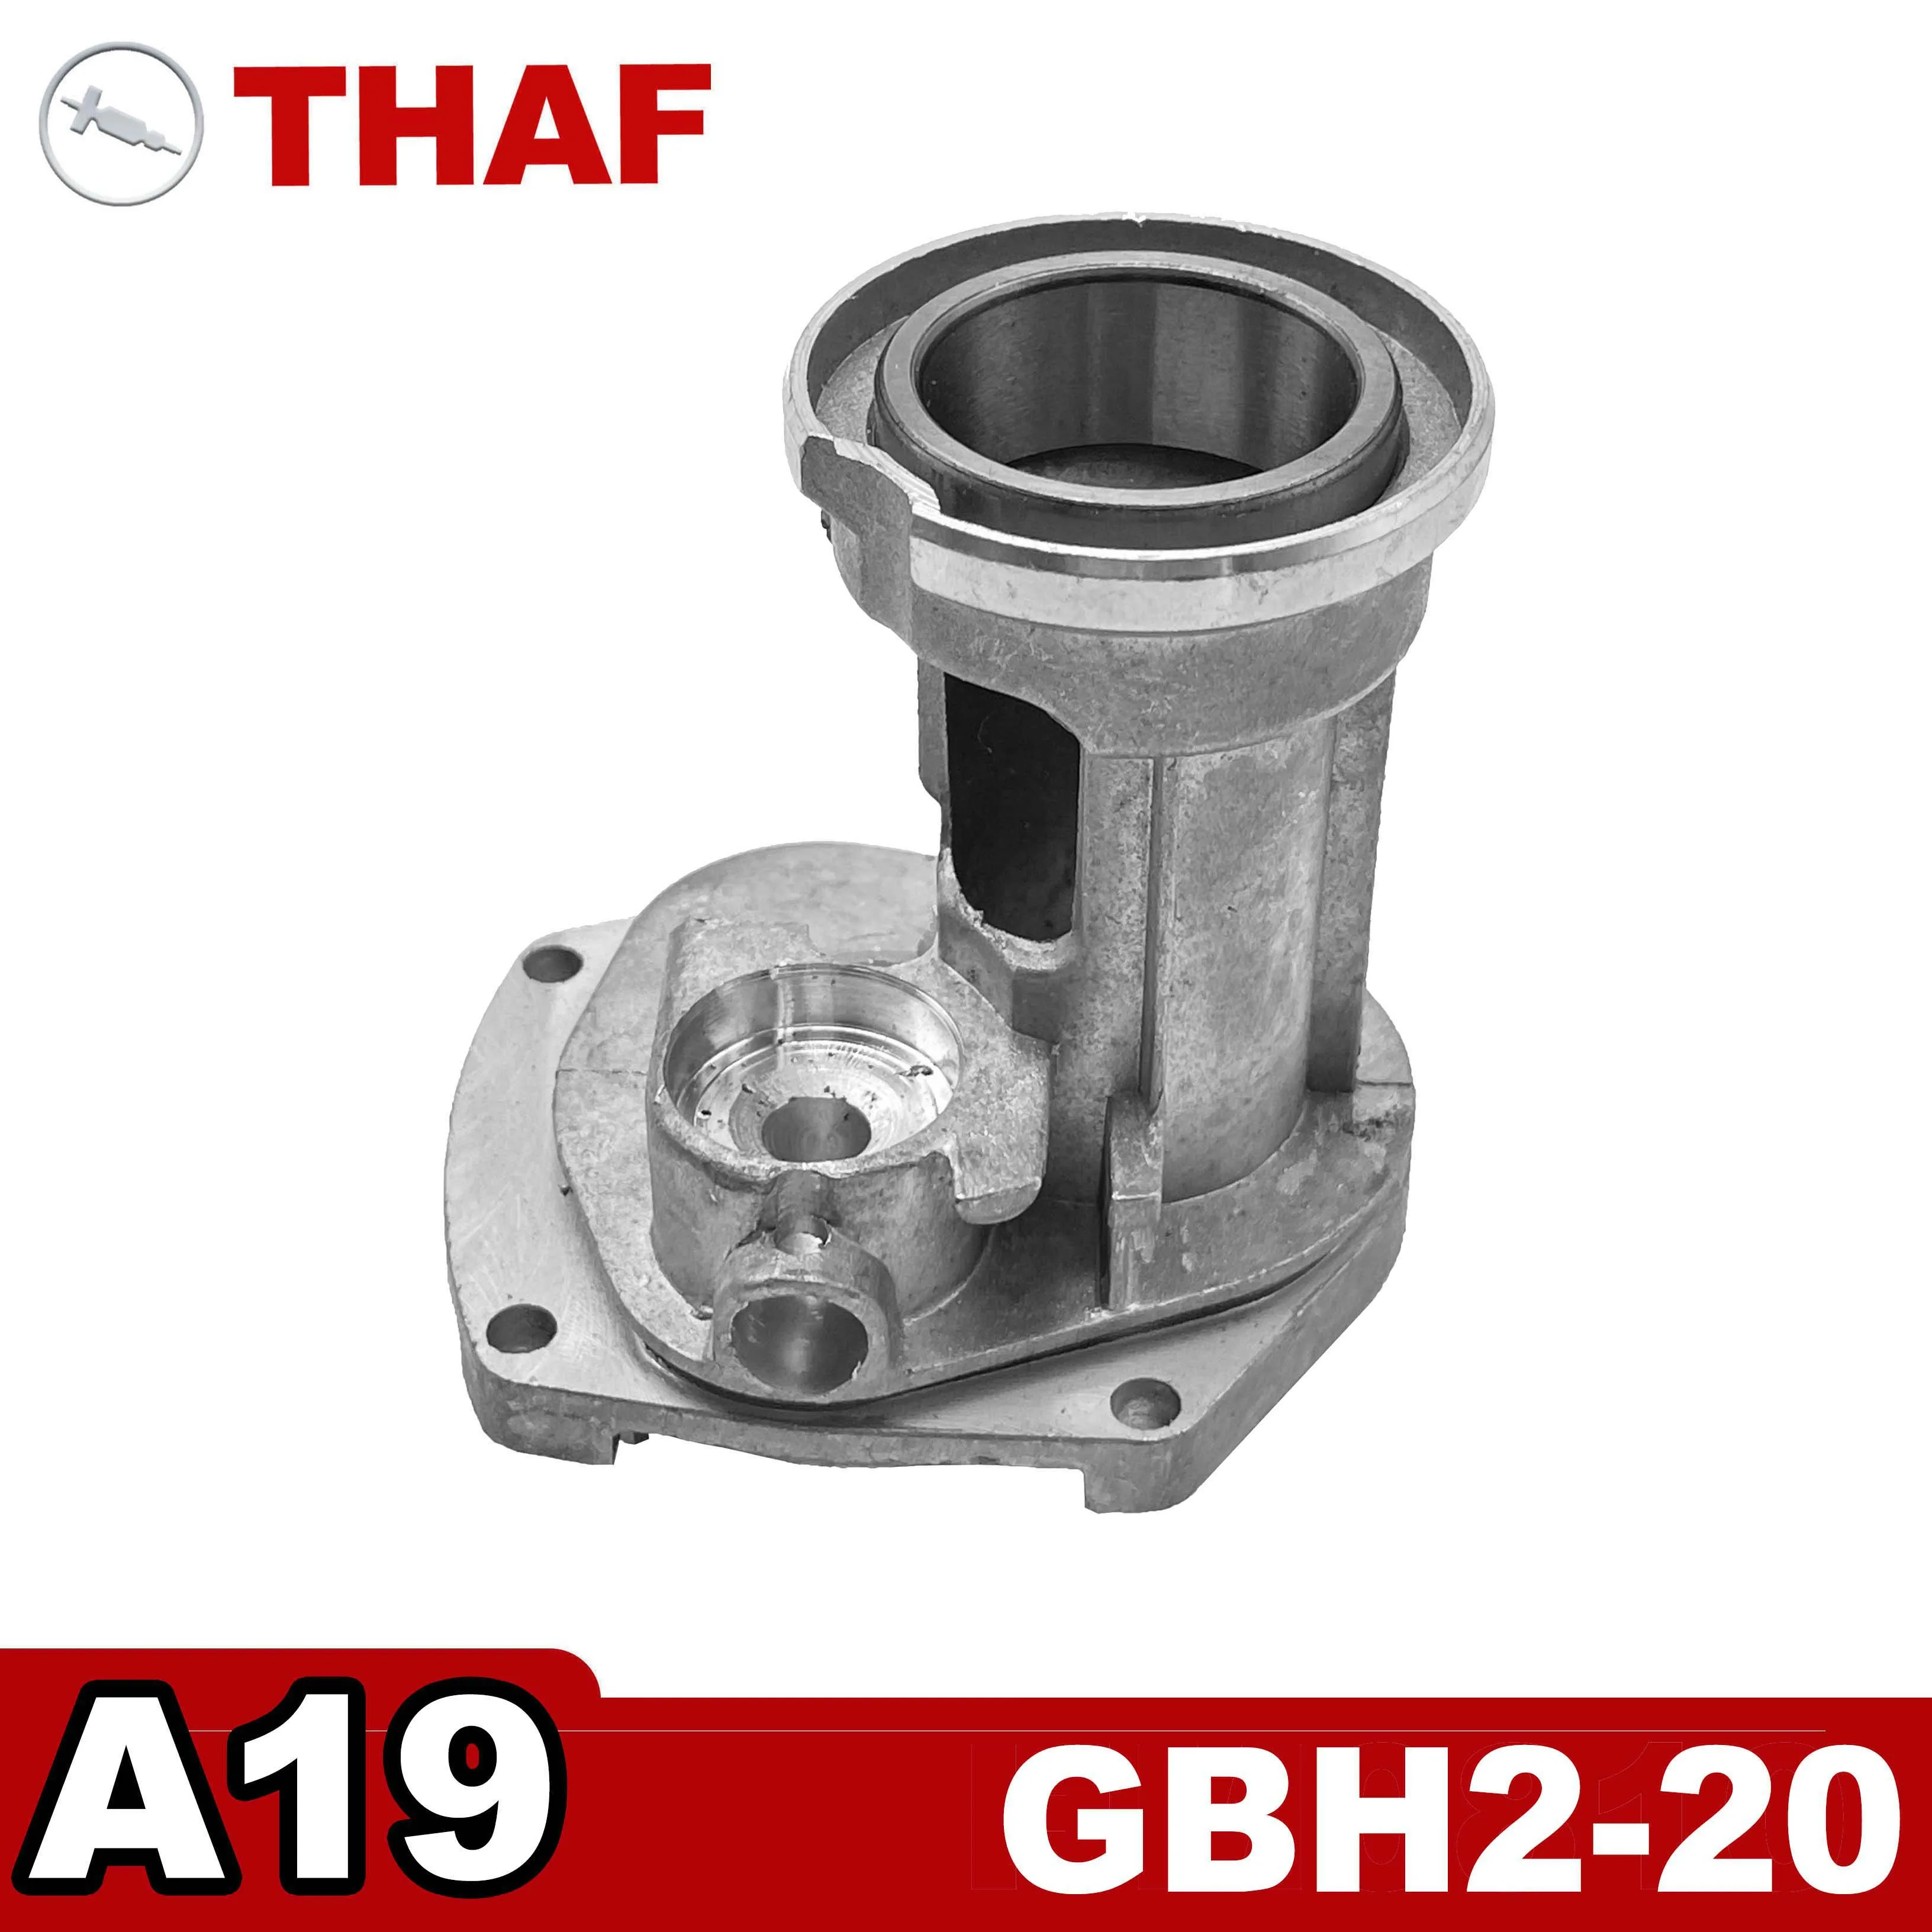 

Holding Spring Replacement Spare Parts for Bosch Rotary Hammer GBH2-20 A19